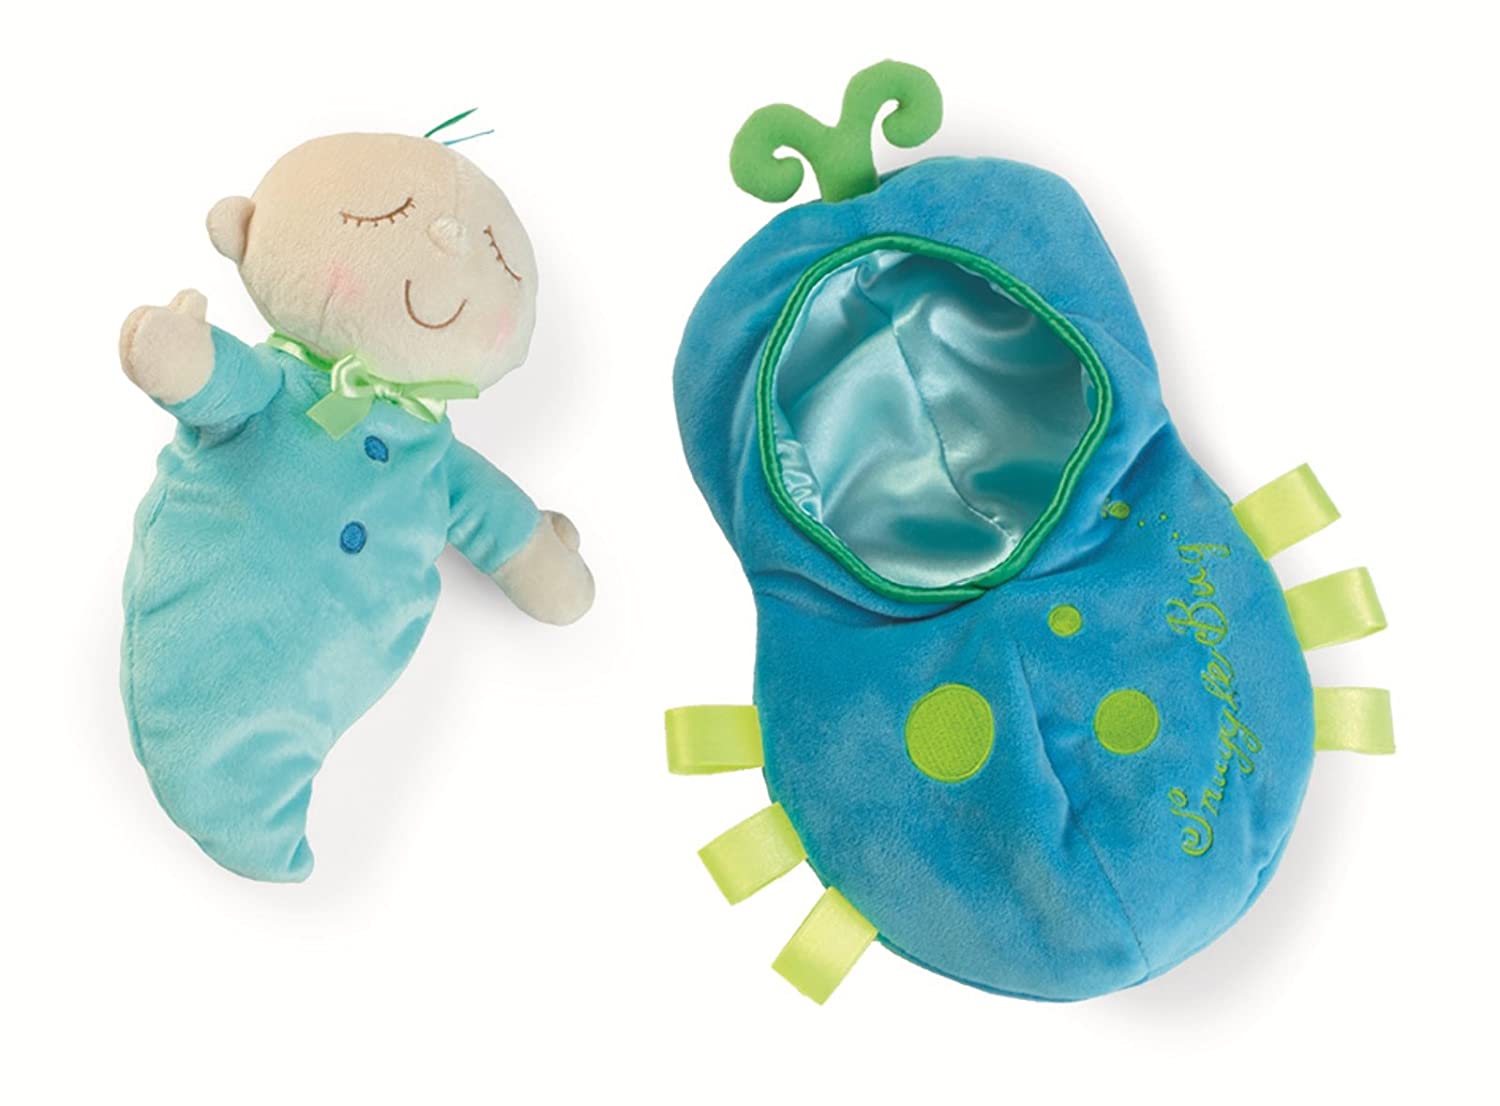 Best Baby Gifts for a 7 month old: Snuggle Baby